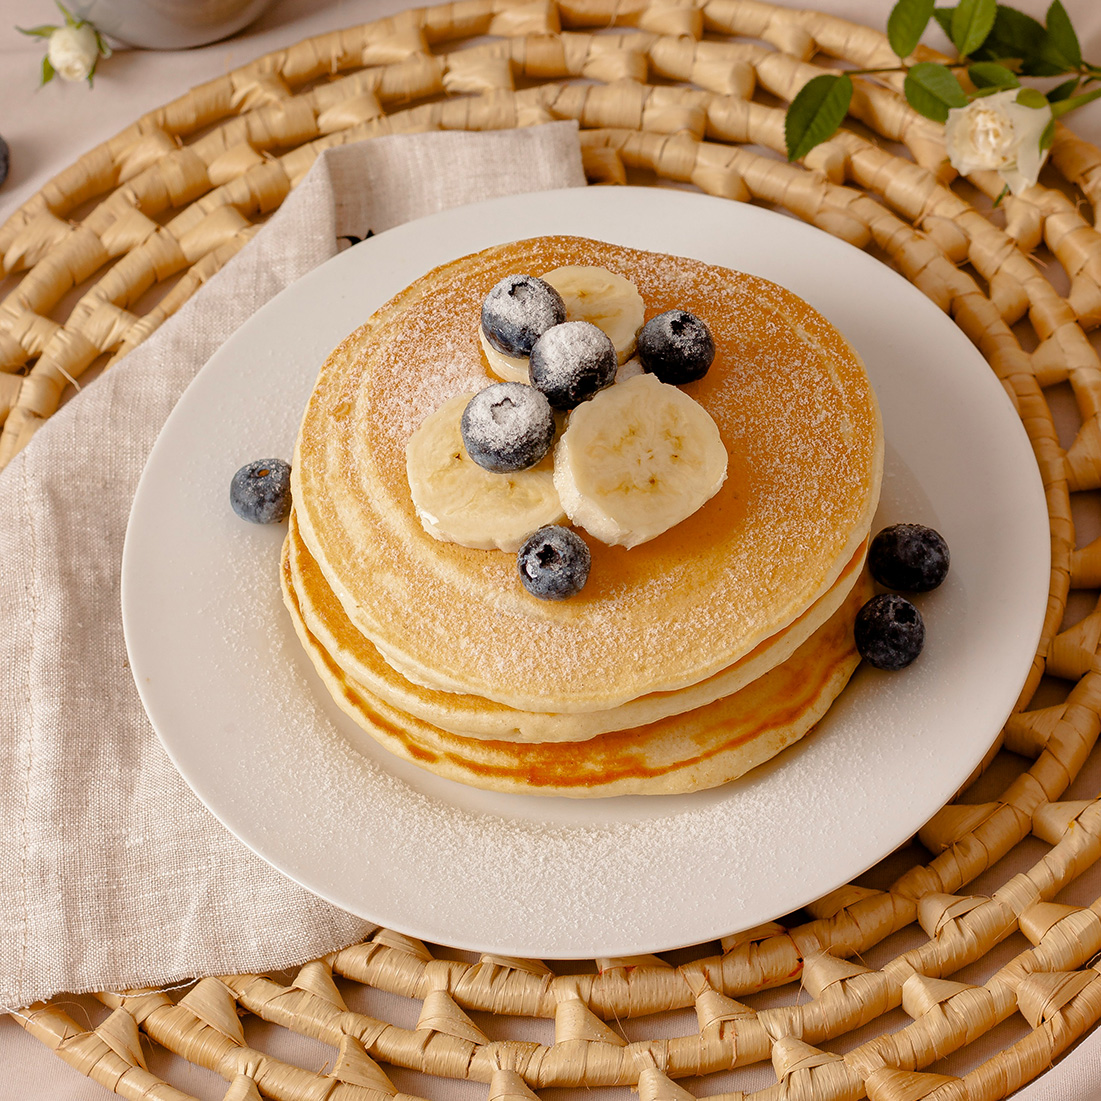 Try our Healthy Pancake Recipe